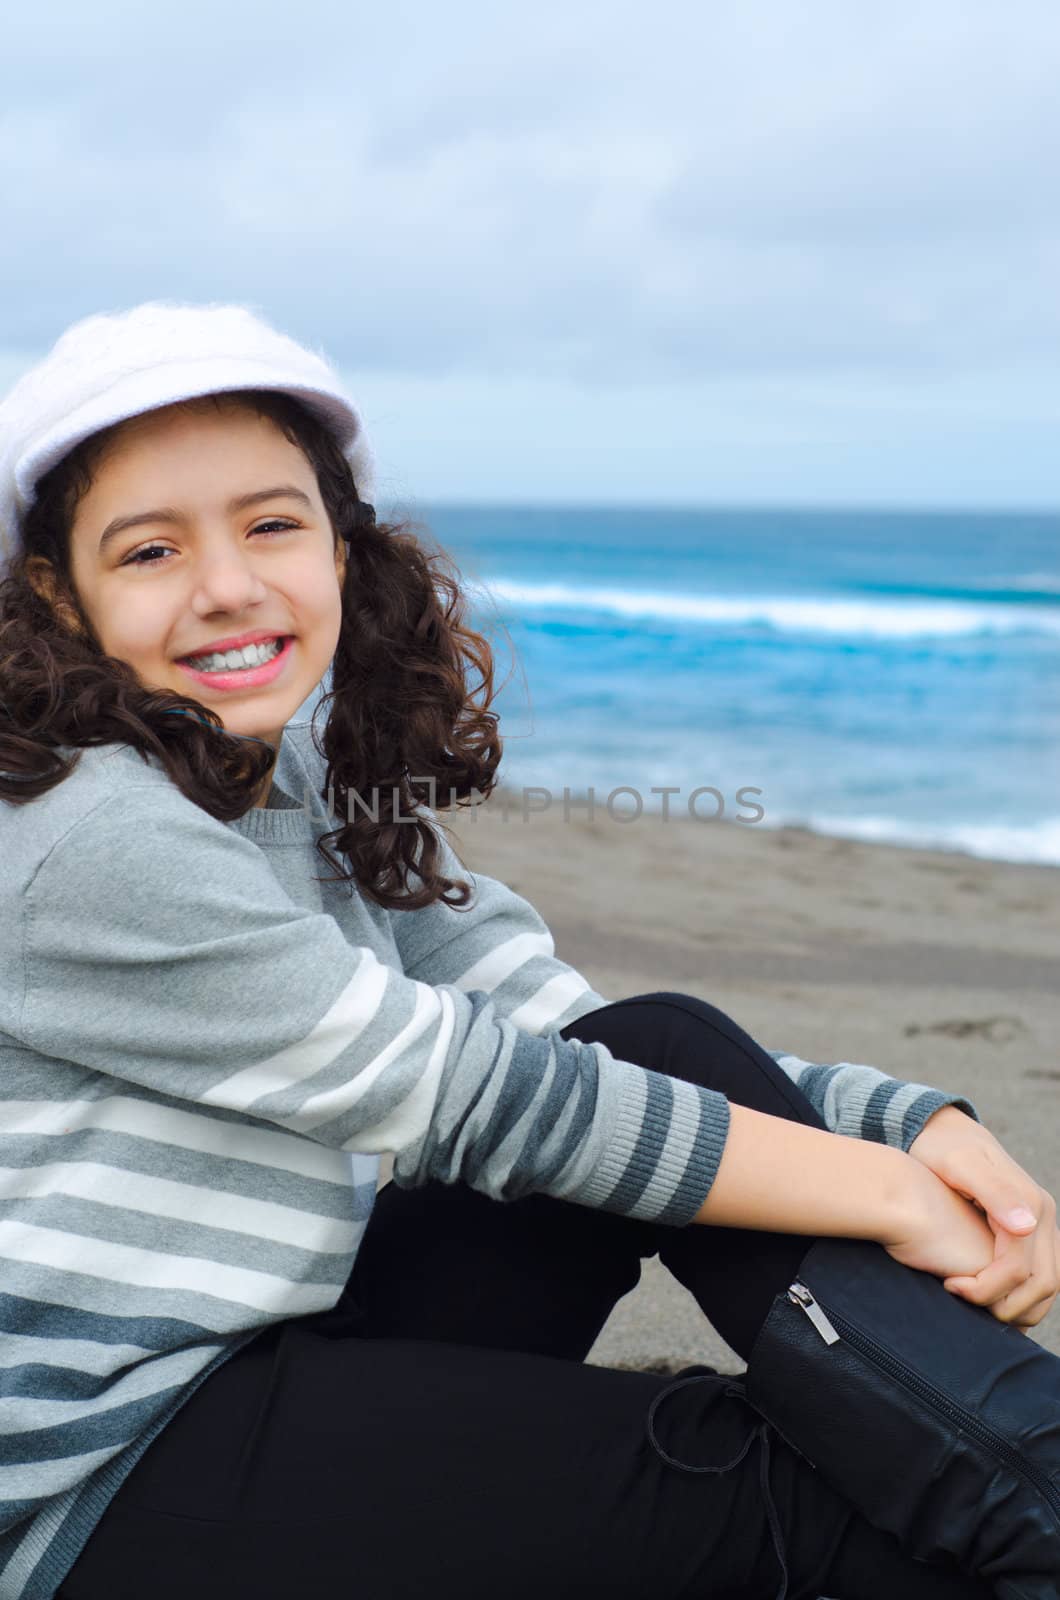 Cute child relaxing at the beach in modern style dress code







C